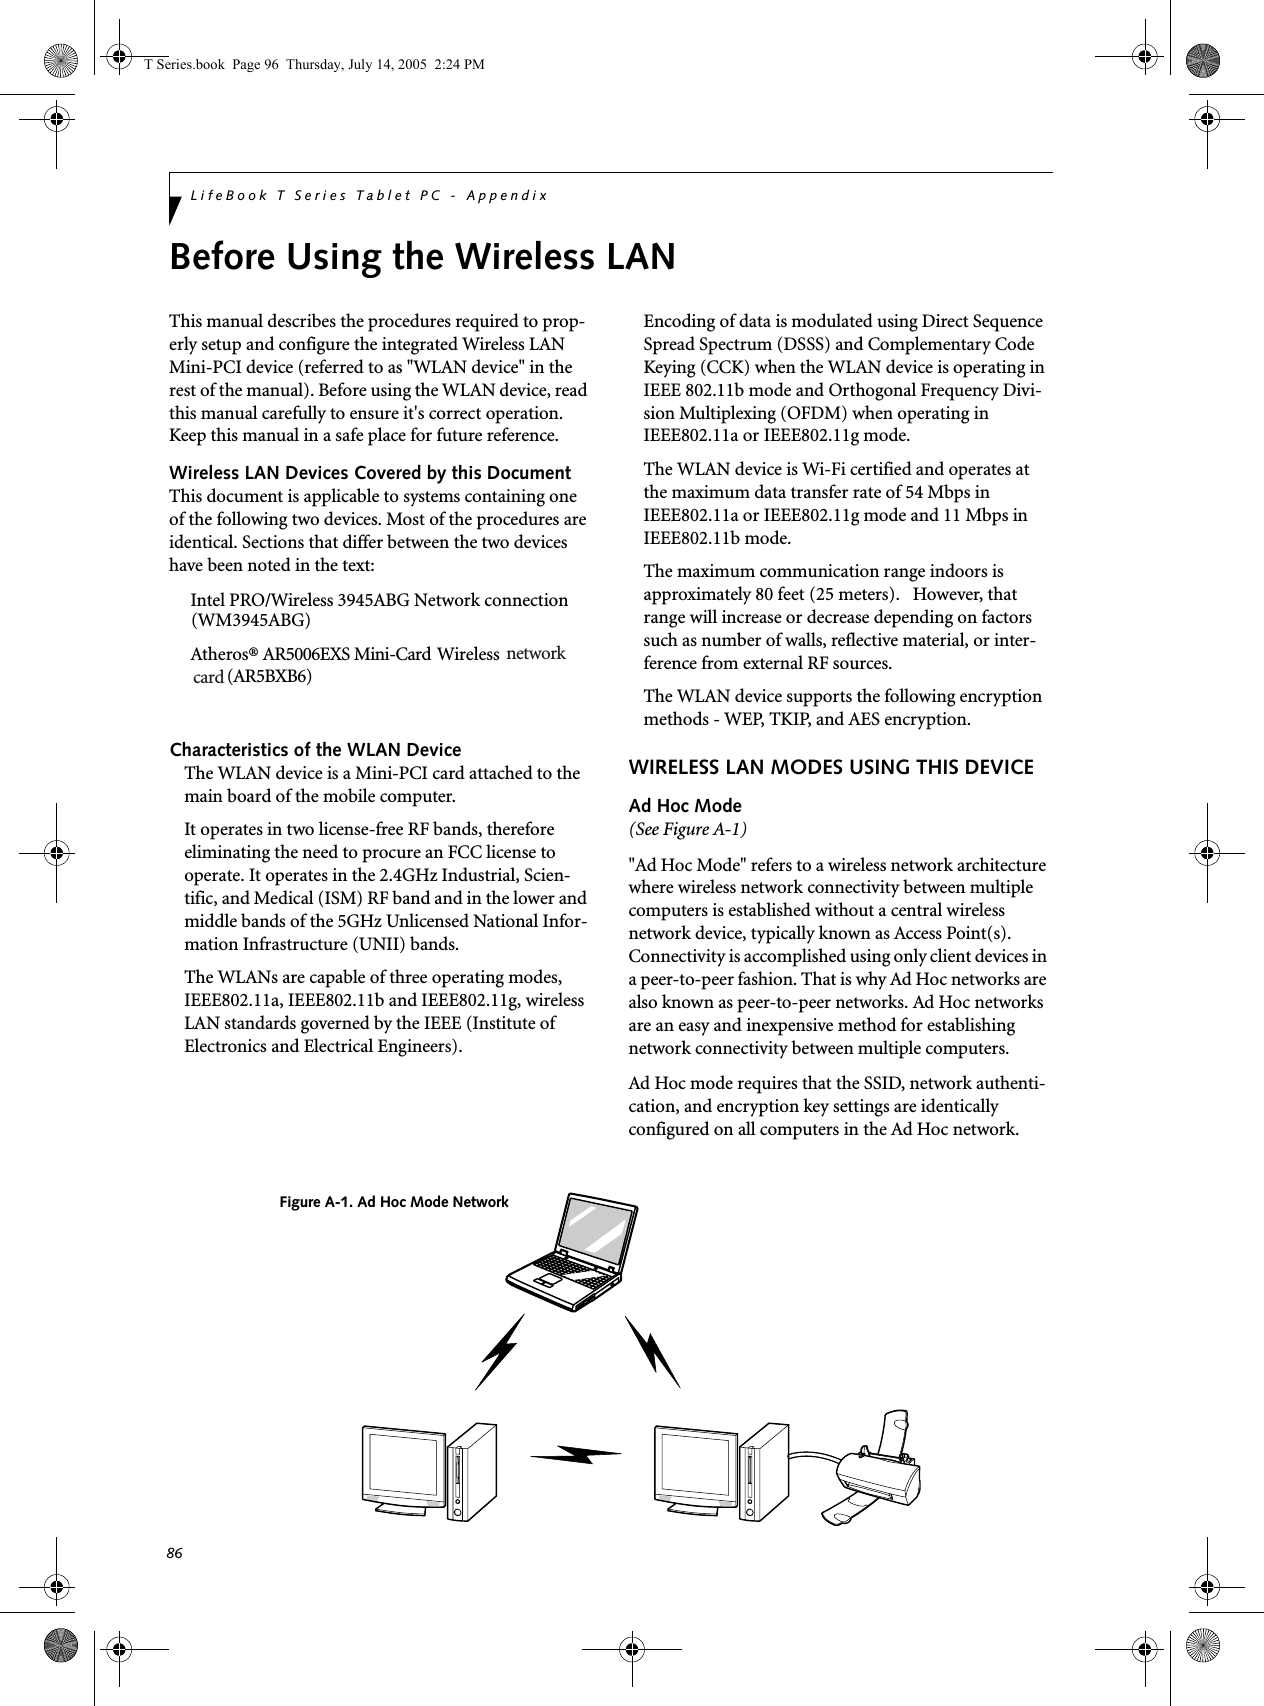 86LifeBook T Series Tablet PC - AppendixBefore Using the Wireless LANThis manual describes the procedures required to prop-erly setup and configure the integrated Wireless LAN Mini-PCI device (referred to as &quot;WLAN device&quot; in the rest of the manual). Before using the WLAN device, read this manual carefully to ensure it&apos;s correct operation. Keep this manual in a safe place for future reference.Wireless LAN Devices Covered by this DocumentThis document is applicable to systems containing one of the following two devices. Most of the procedures are identical. Sections that differ between the two devices have been noted in the text:Intel PRO/Wireless 3945ABG Network connectionAtheros® AR5006EXS Mini-Card   Wireless Characteristics of the WLAN DeviceThe WLAN device is a Mini-PCI card attached to the main board of the mobile computer. It operates in two license-free RF bands, therefore eliminating the need to procure an FCC license to operate. It operates in the 2.4GHz Industrial, Scien-tific, and Medical (ISM) RF band and in the lower and middle bands of the 5GHz Unlicensed National Infor-mation Infrastructure (UNII) bands. The WLANs are capable of three operating modes, IEEE802.11a, IEEE802.11b and IEEE802.11g, wireless LAN standards governed by the IEEE (Institute of Electronics and Electrical Engineers). Encoding of data is modulated using Direct Sequence Spread Spectrum (DSSS) and Complementary Code Keying (CCK) when the WLAN device is operating in IEEE 802.11b mode and Orthogonal Frequency Divi-sion Multiplexing (OFDM) when operating in IEEE802.11a or IEEE802.11g mode. The WLAN device is Wi-Fi certified and operates at the maximum data transfer rate of 54 Mbps in IEEE802.11a or IEEE802.11g mode and 11 Mbps in IEEE802.11b mode.The maximum communication range indoors is approximately 80 feet (25 meters).   However, that range will increase or decrease depending on factors such as number of walls, reflective material, or inter-ference from external RF sources.The WLAN device supports the following encryption methods - WEP, TKIP, and AES encryption.WIRELESS LAN MODES USING THIS DEVICEAd Hoc Mode (See Figure A-1)&quot;Ad Hoc Mode&quot; refers to a wireless network architecture where wireless network connectivity between multiple computers is established without a central wireless network device, typically known as Access Point(s). Connectivity is accomplished using only client devices in a peer-to-peer fashion. That is why Ad Hoc networks are also known as peer-to-peer networks. Ad Hoc networks are an easy and inexpensive method for establishing network connectivity between multiple computers.Ad Hoc mode requires that the SSID, network authenti-cation, and encryption key settings are identically configured on all computers in the Ad Hoc network. Figure A-1. Ad Hoc Mode NetworkT Series.book  Page 96  Thursday, July 14, 2005  2:24 PMcard (WM3945ABG)(AR5BXB6)network 